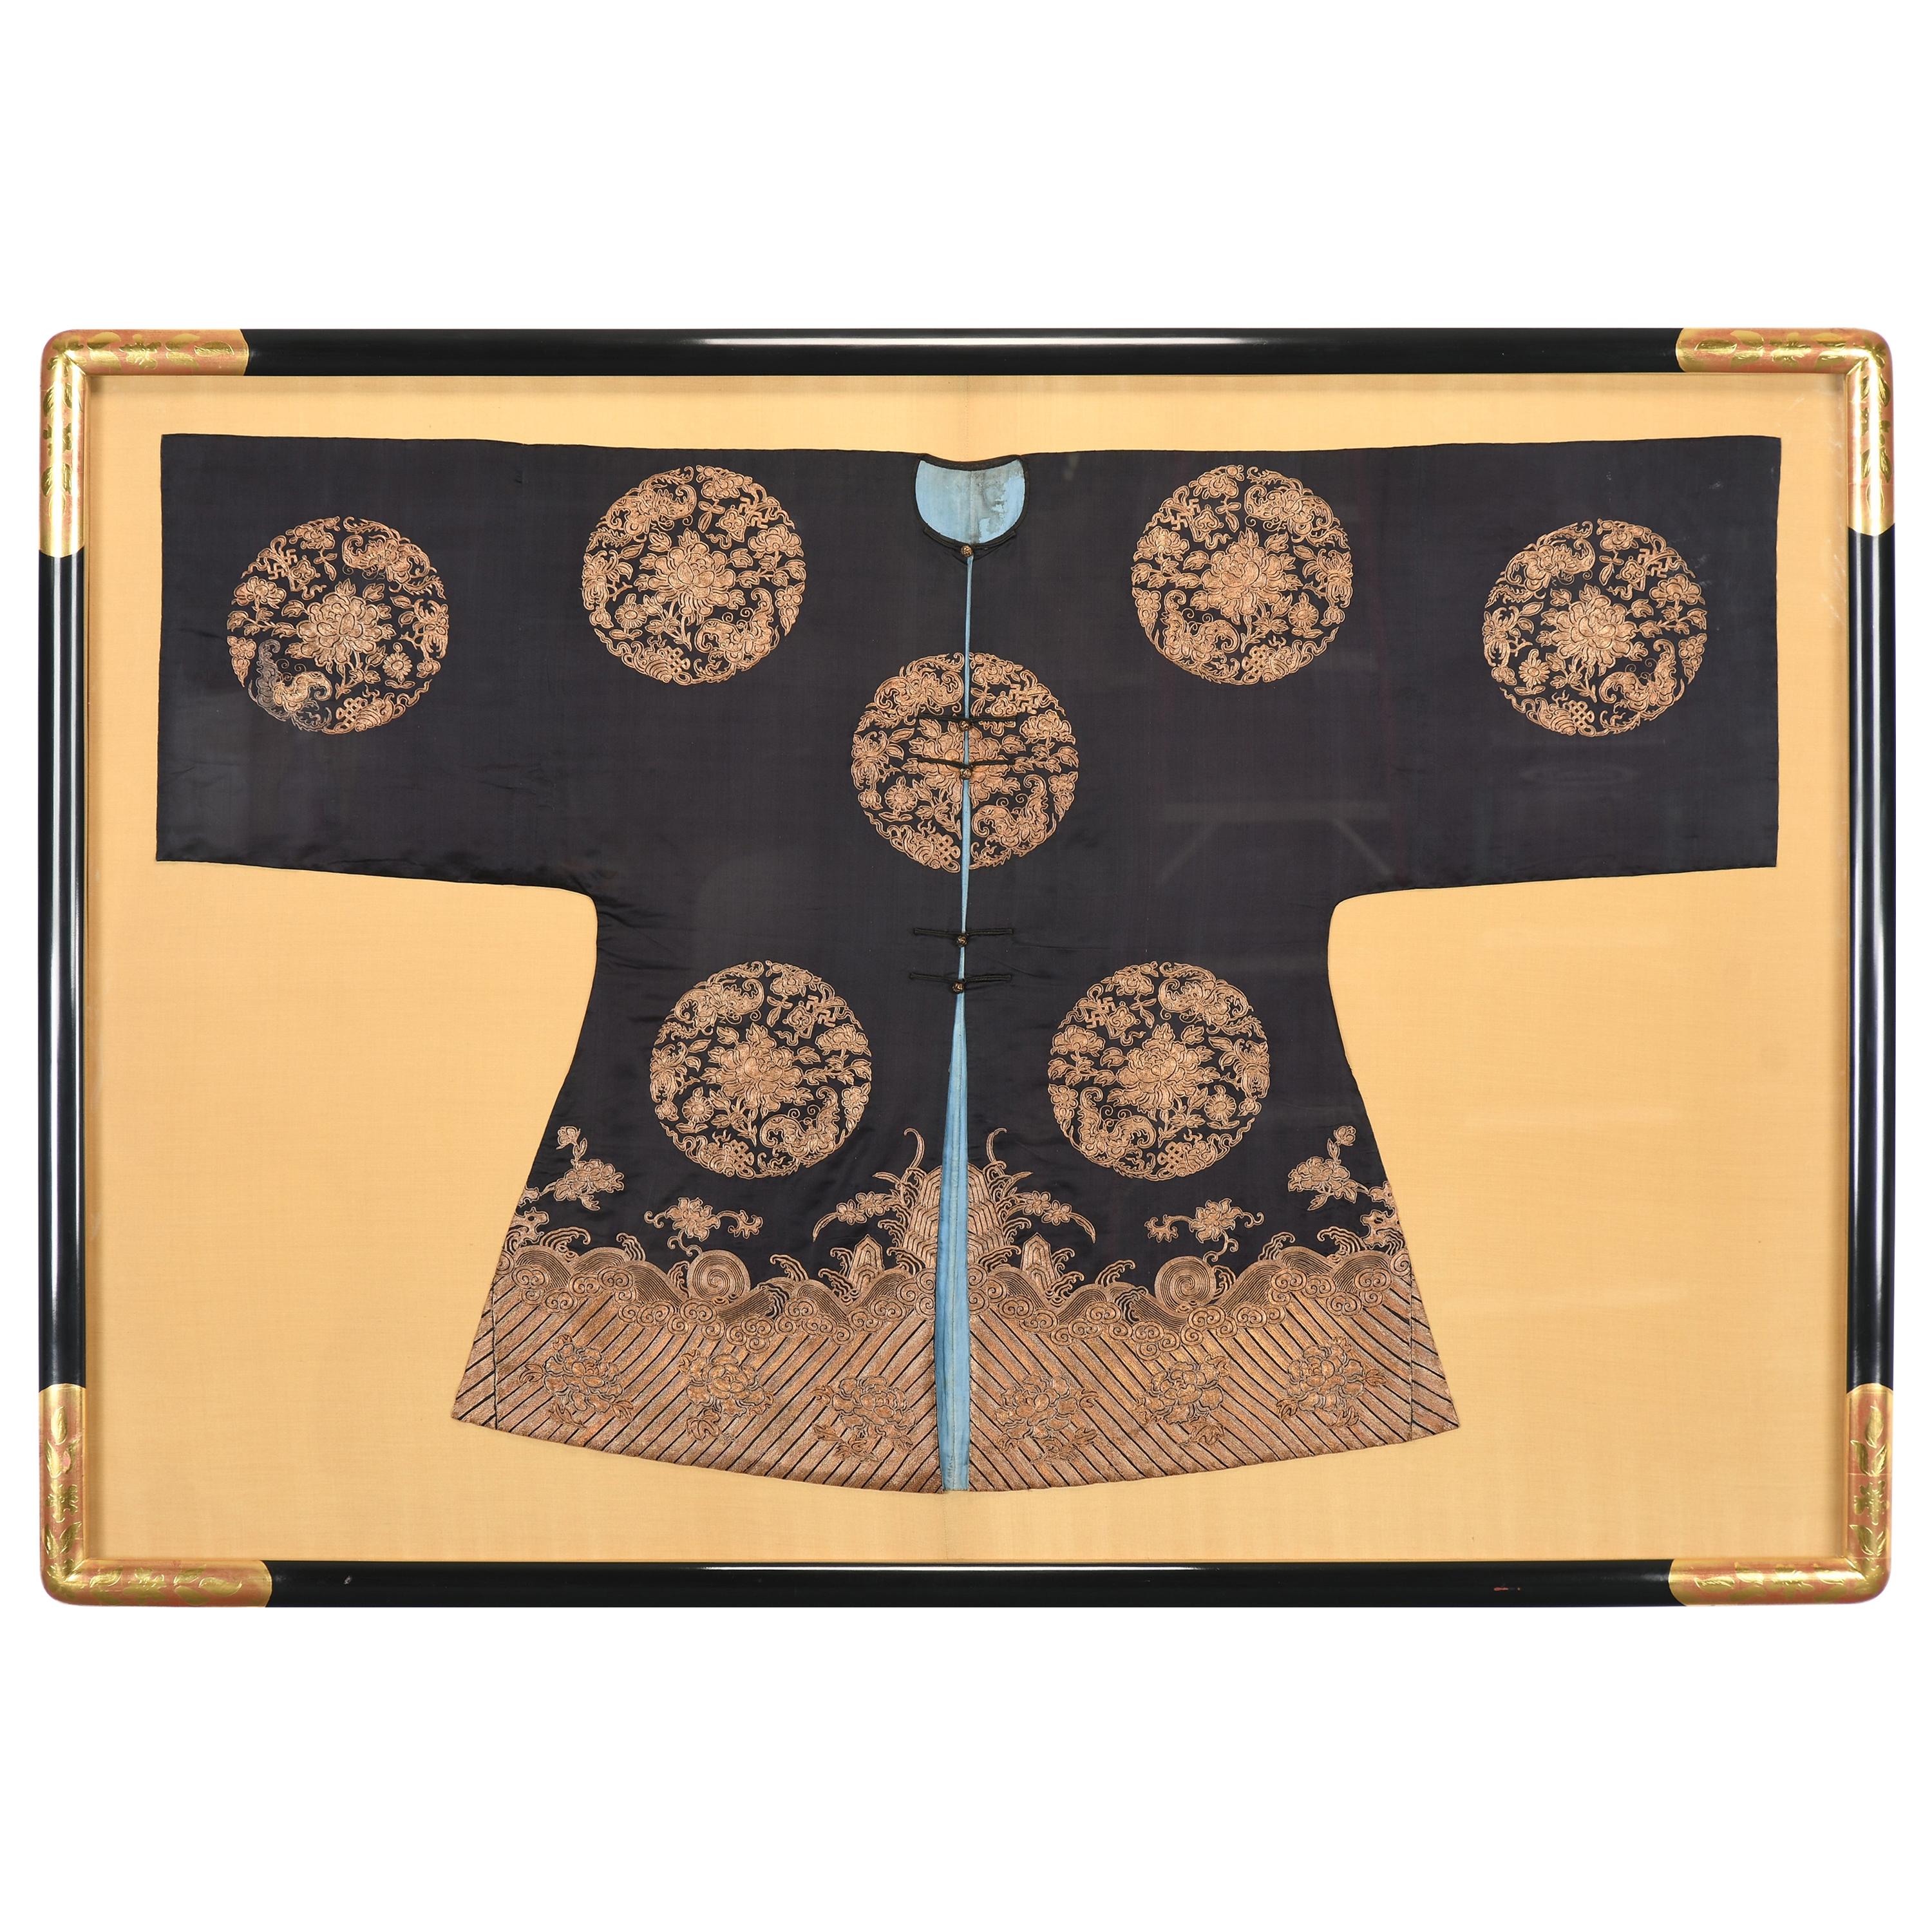 Framed Chinese Kimono Daoguang Period, 1830-1850